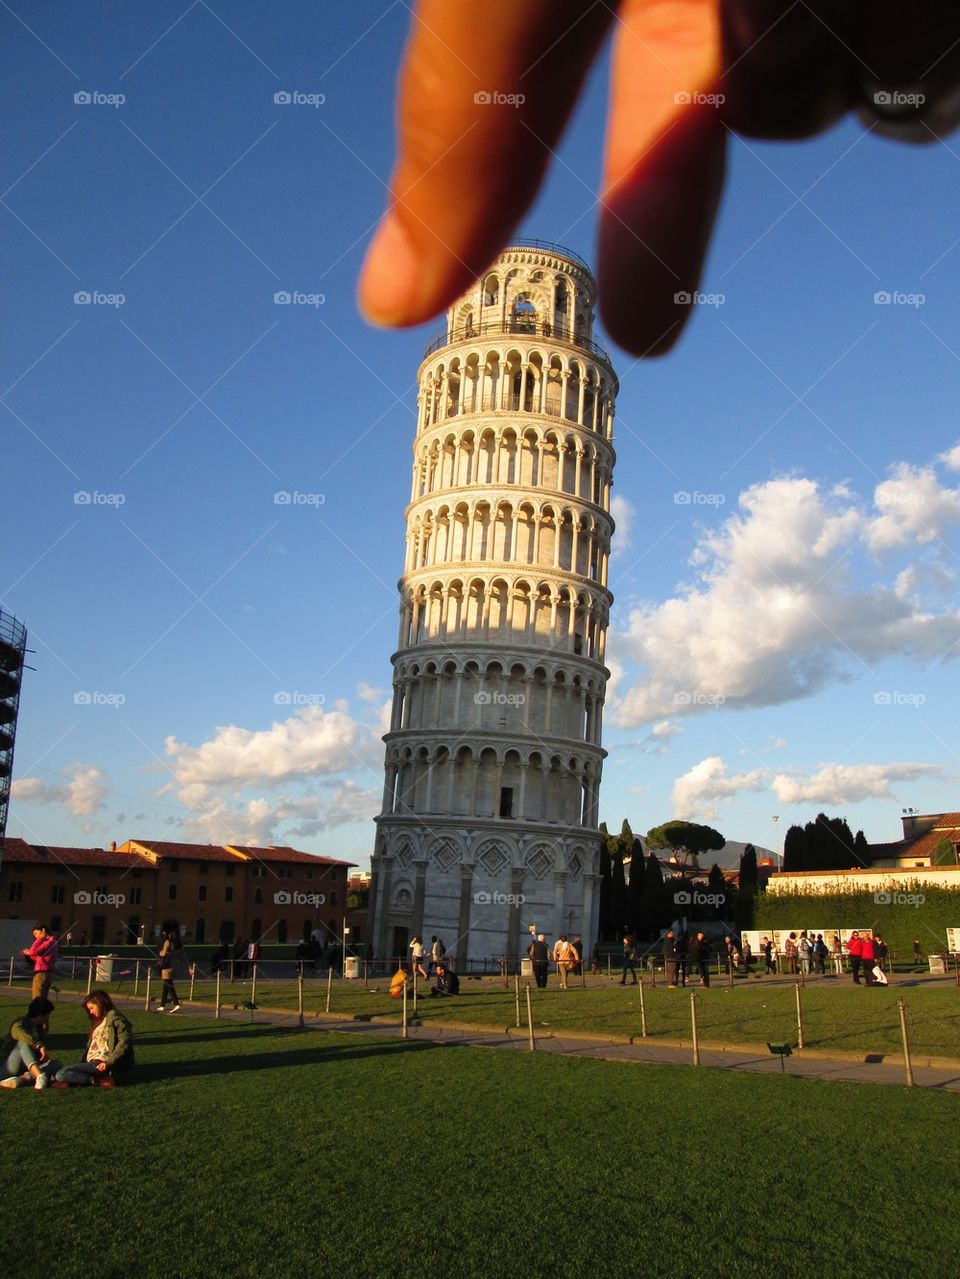 The leaning Tower of Pisa 